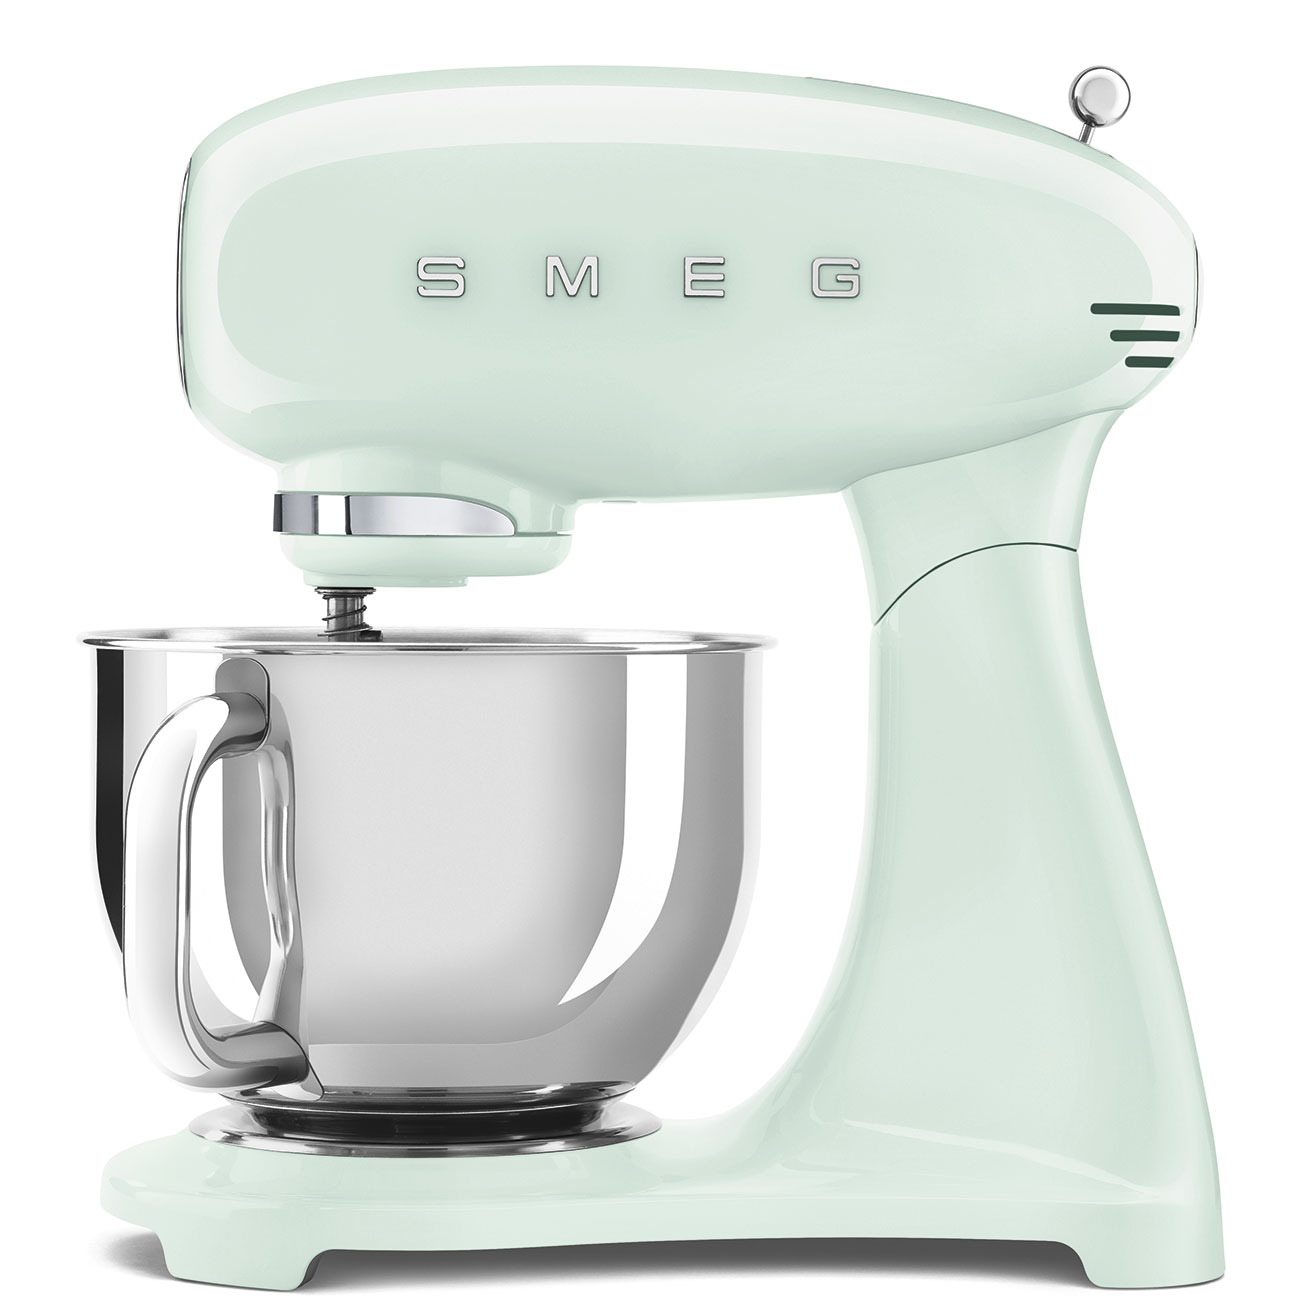 Pastel green Stand mixer full color SMF03PGEU Smeg_1